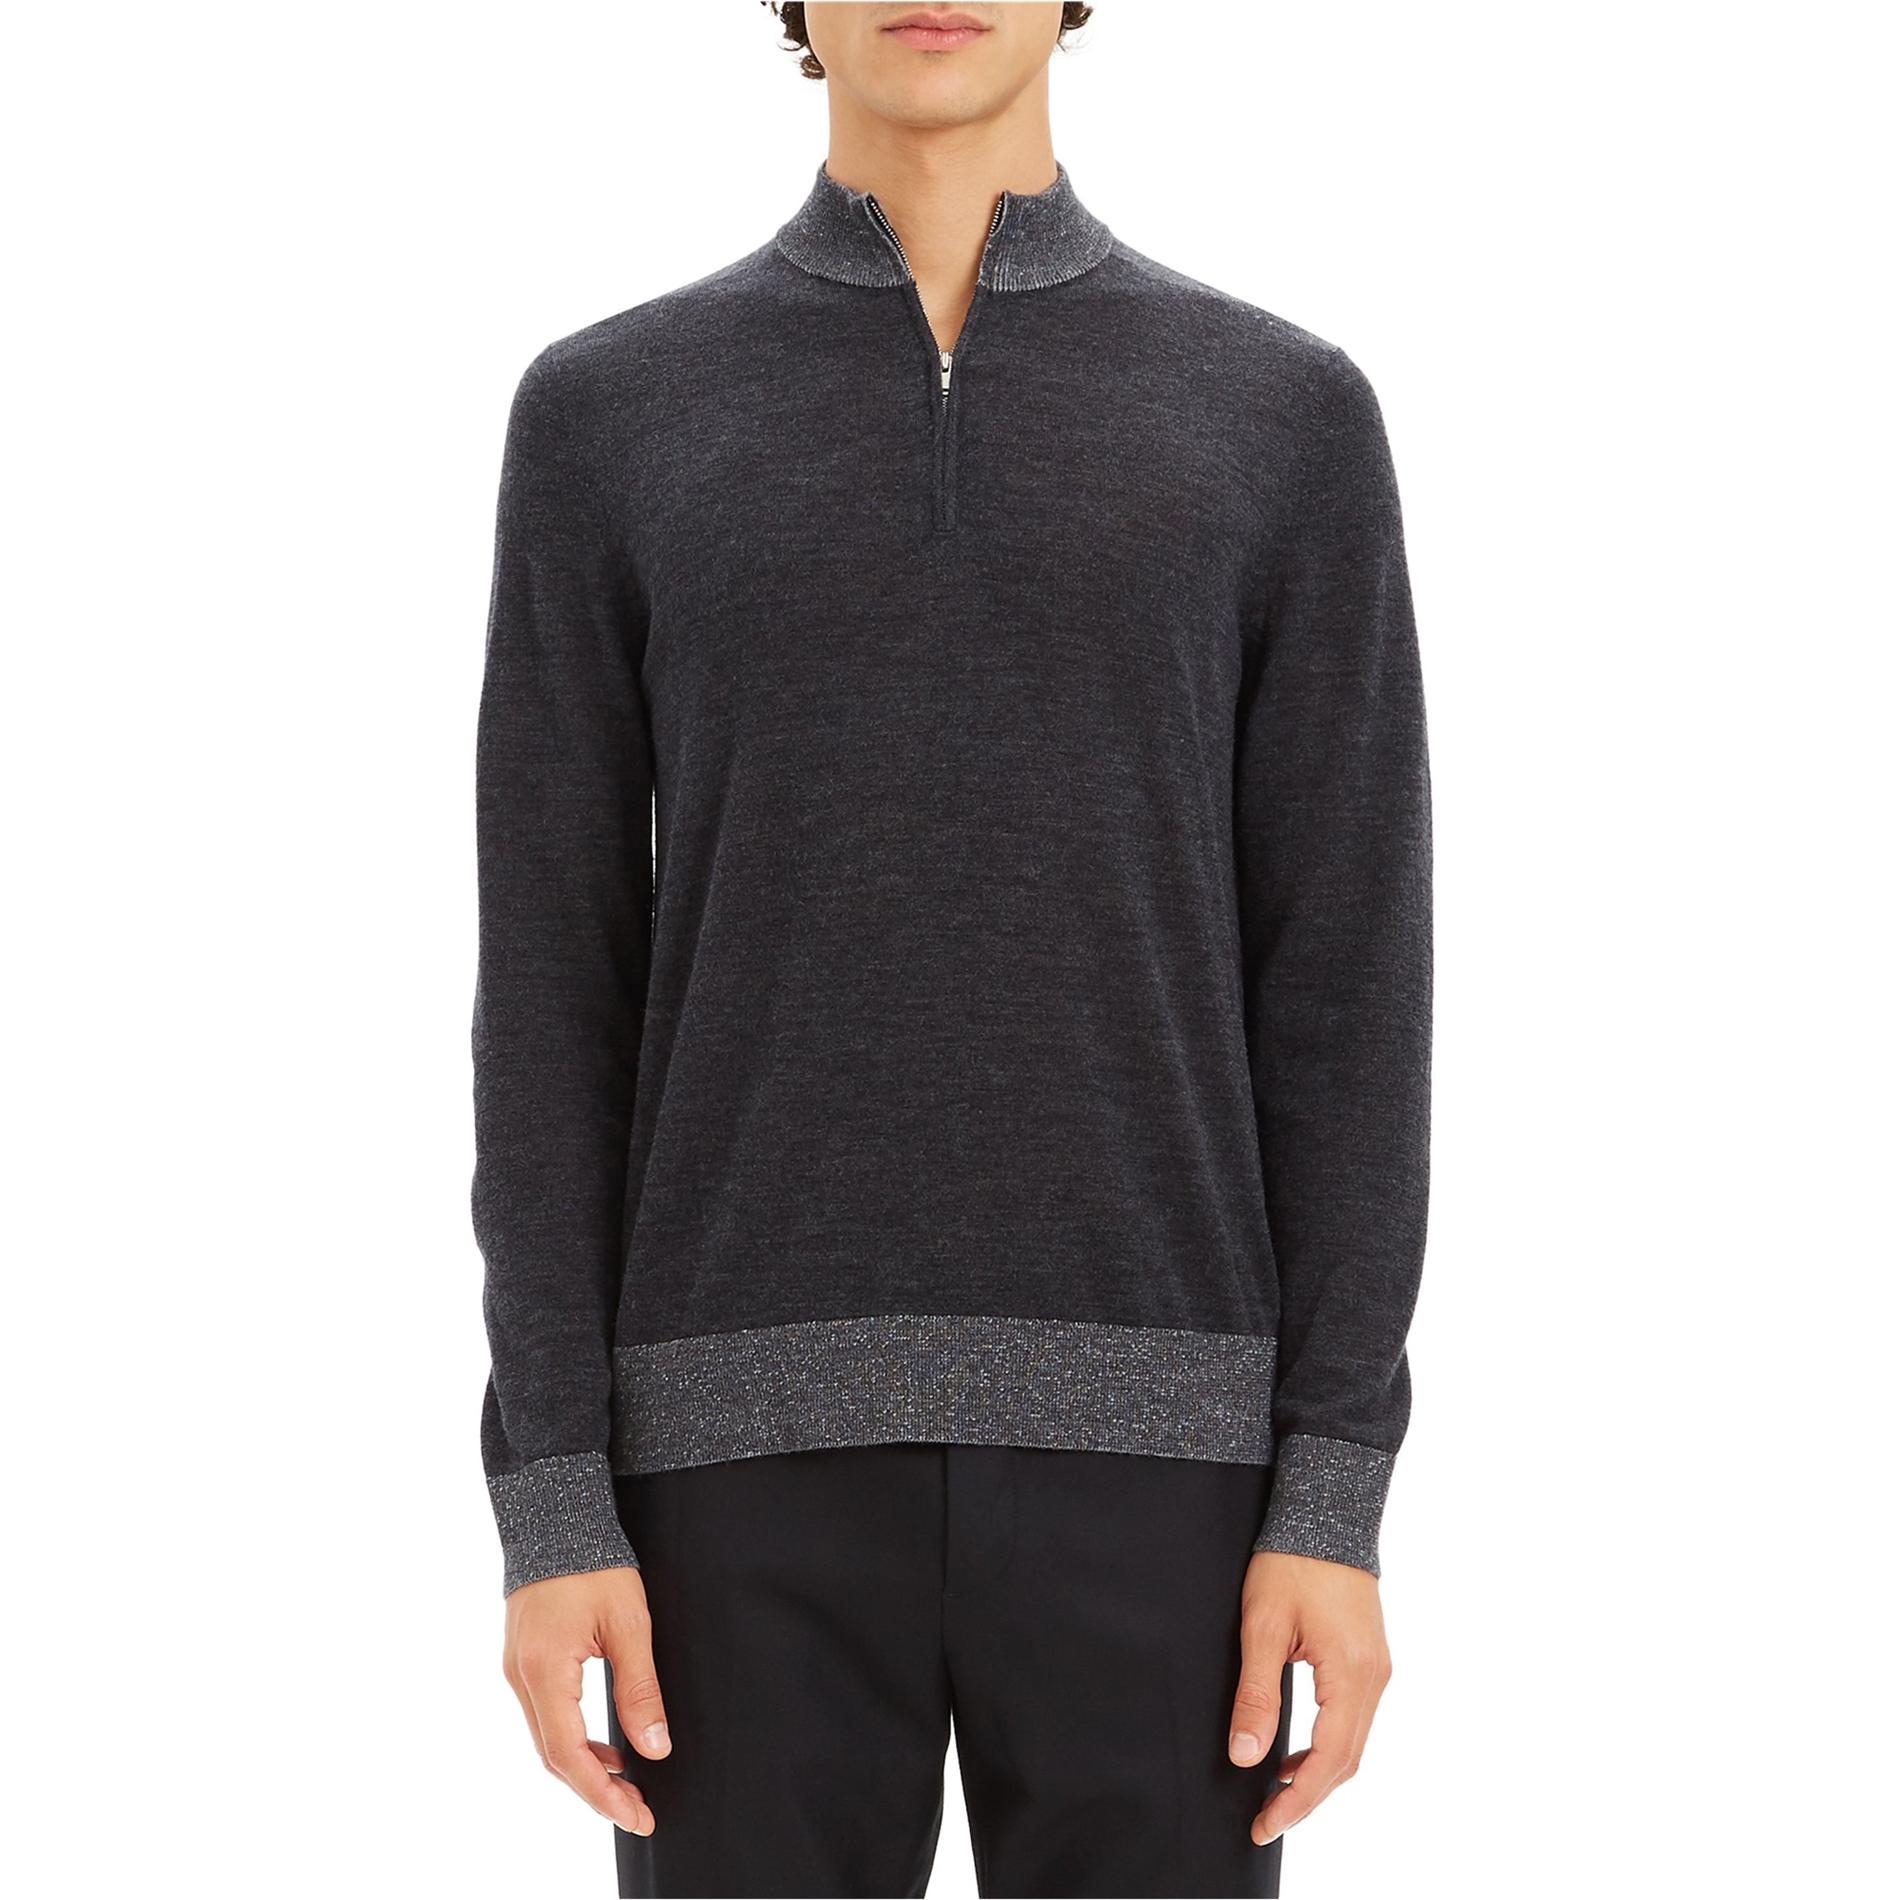 Theory Mens Quarter Zip Pullover Sweater